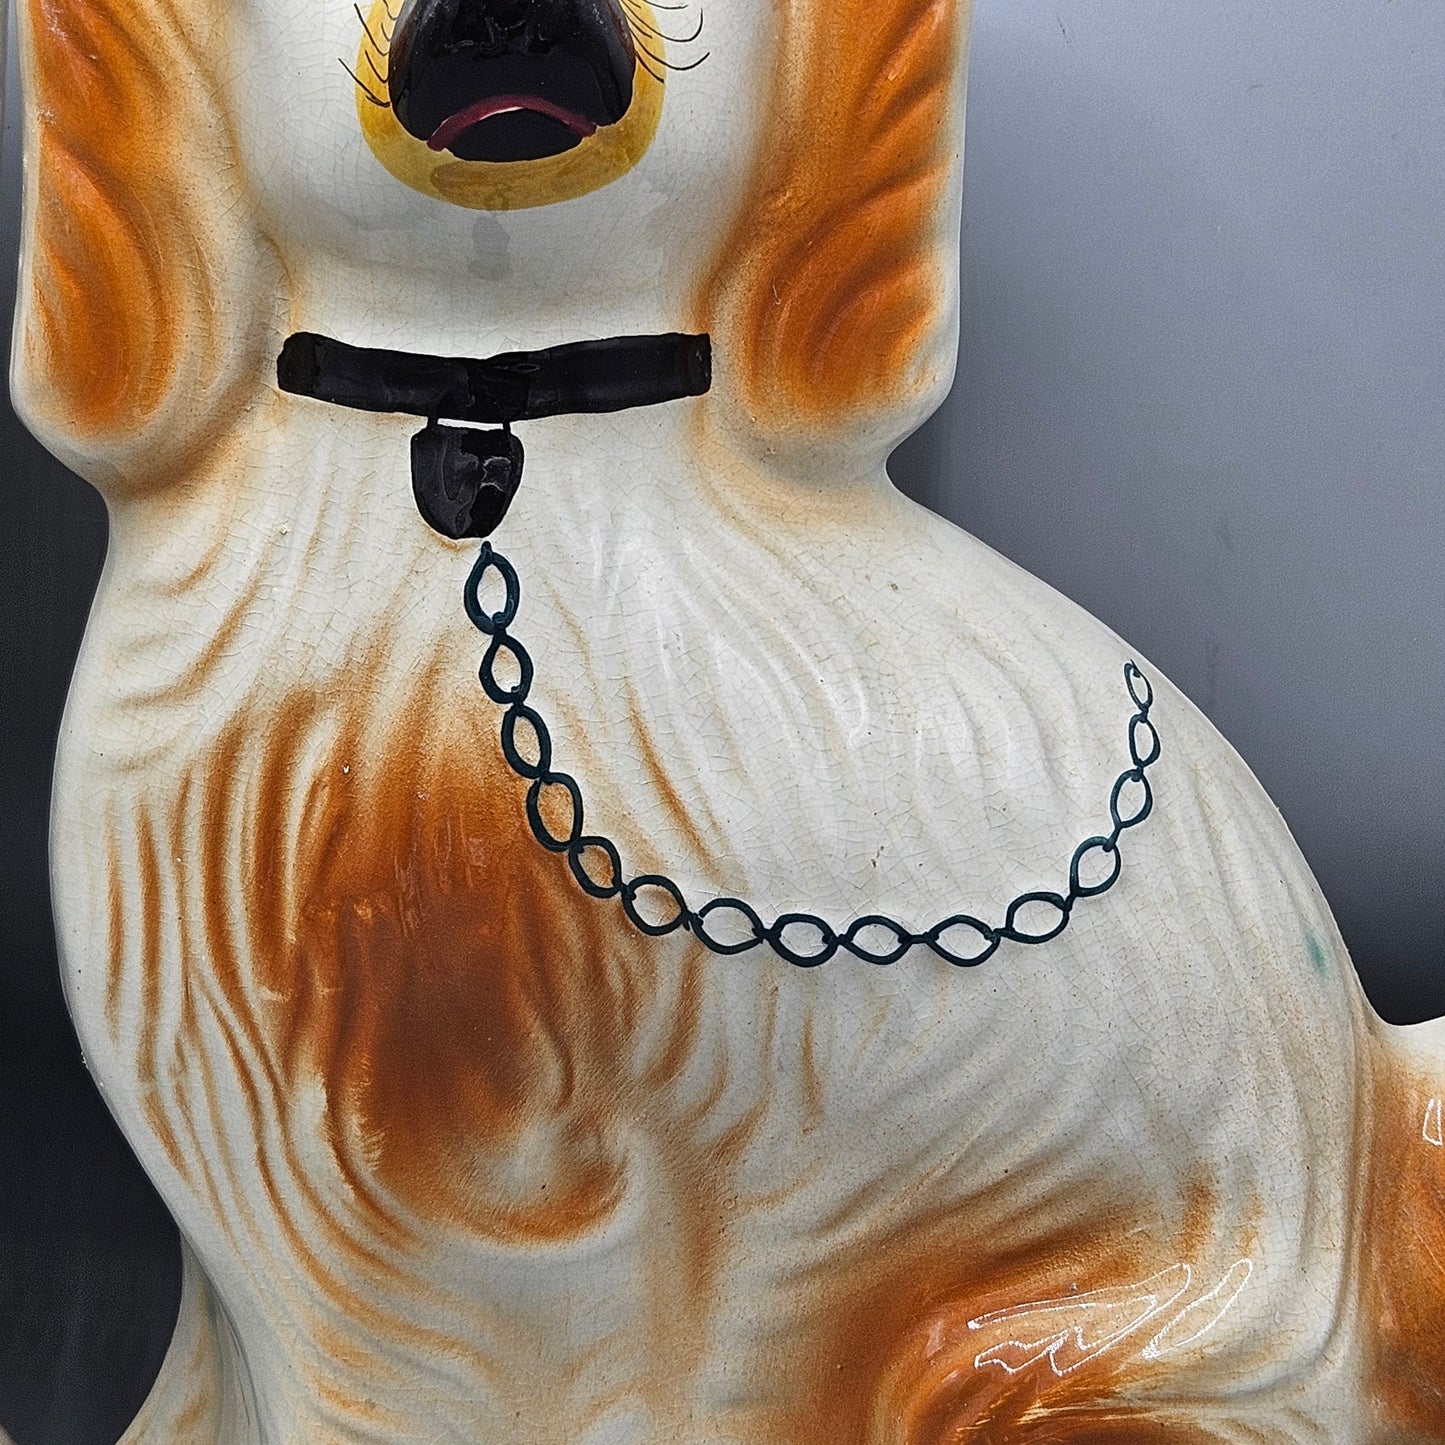 Pair of Staffordshire Dog Figures (one missing an eye) ~ 14"